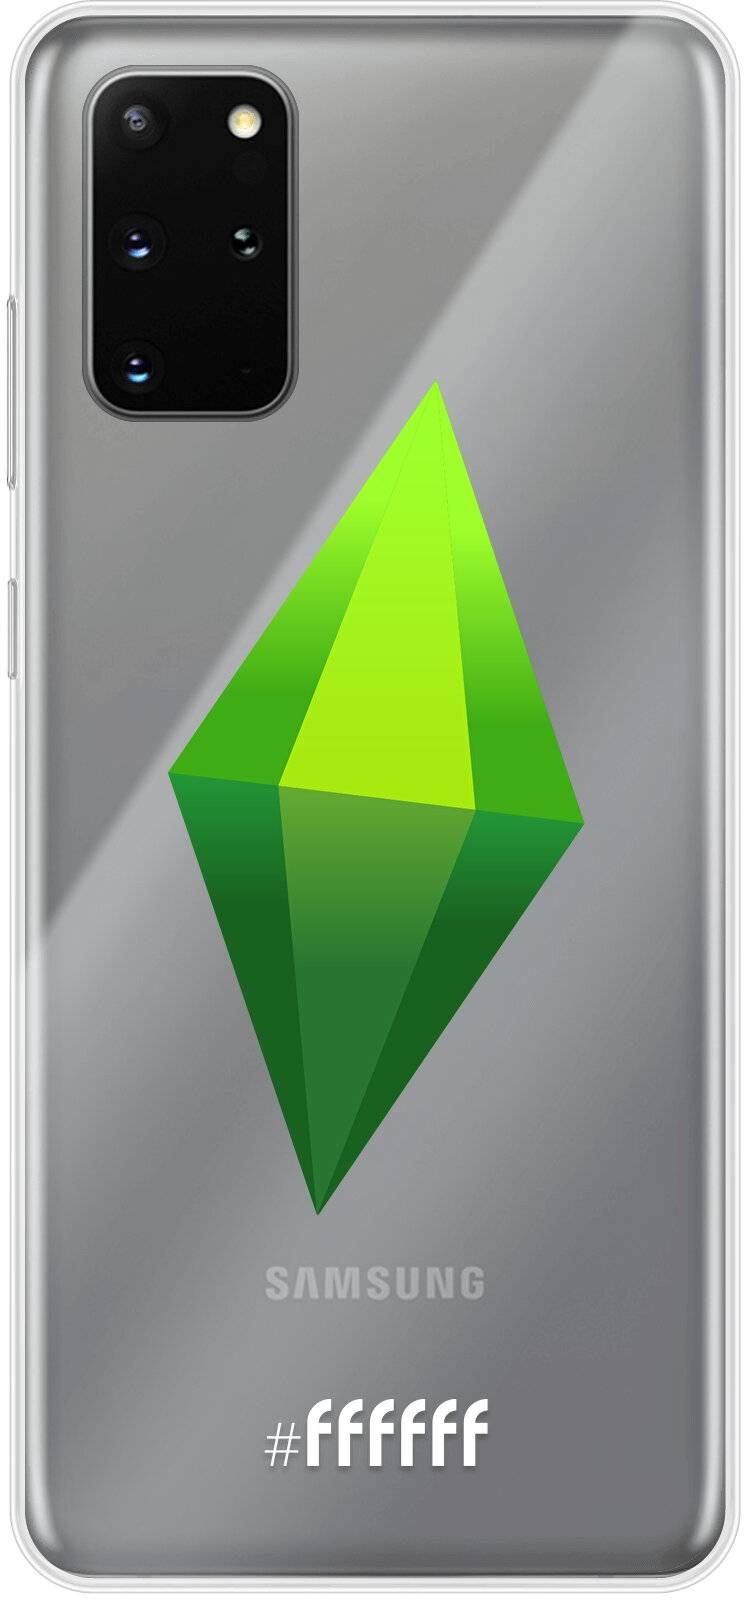 The Sims Galaxy S20+